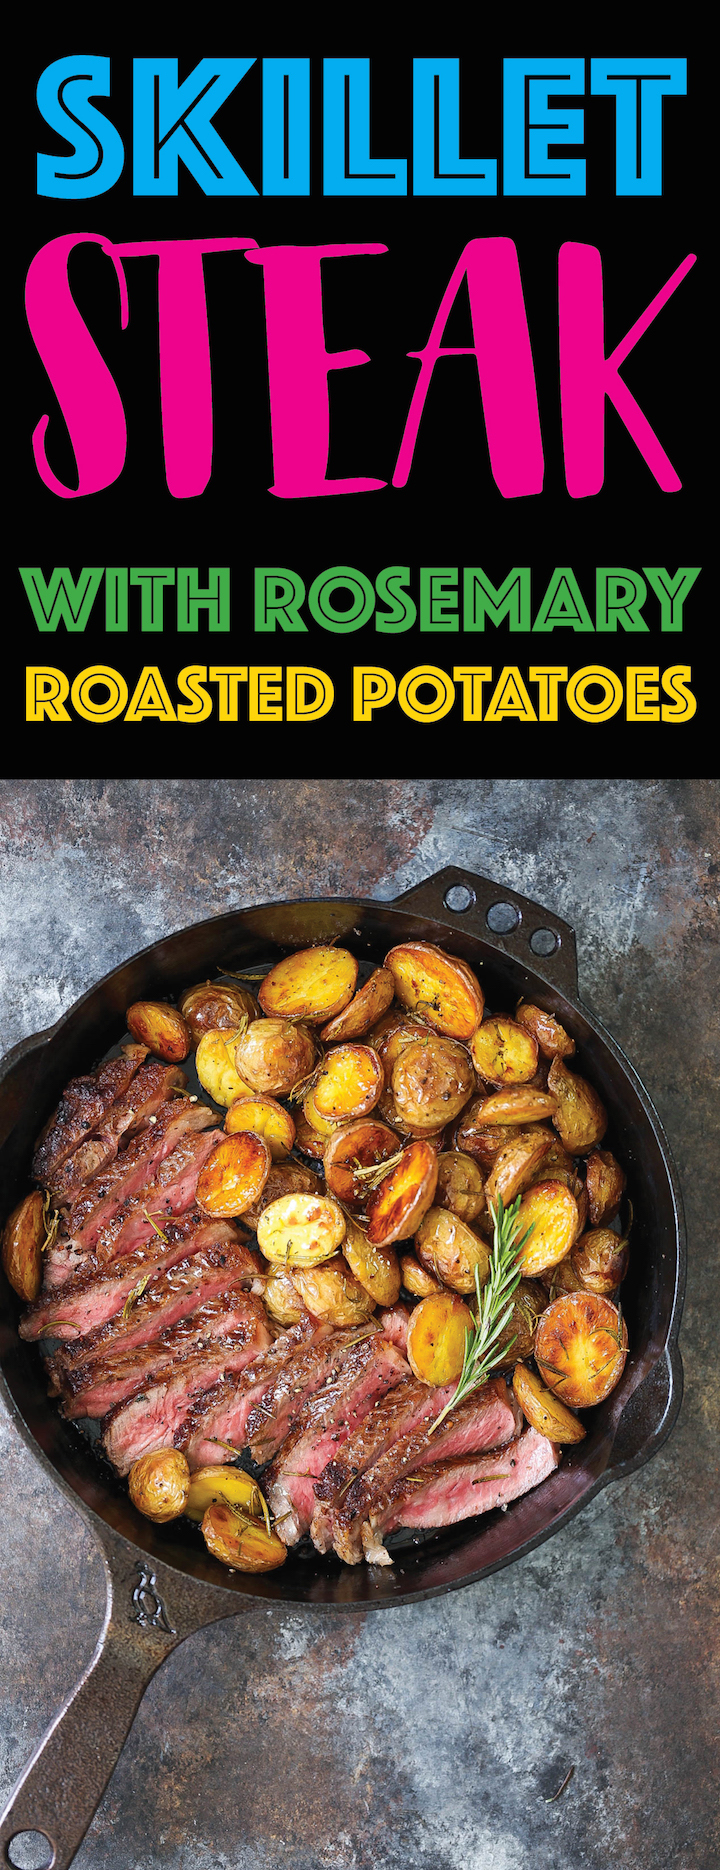 Skillet Steak with Rosemary Roasted Potatoes - The BEST and easiest 5 ingredient dinner ever! With perfectly golden brown, crisp, rosemary roasted potatoes and the most amazing buttery skillet steak!